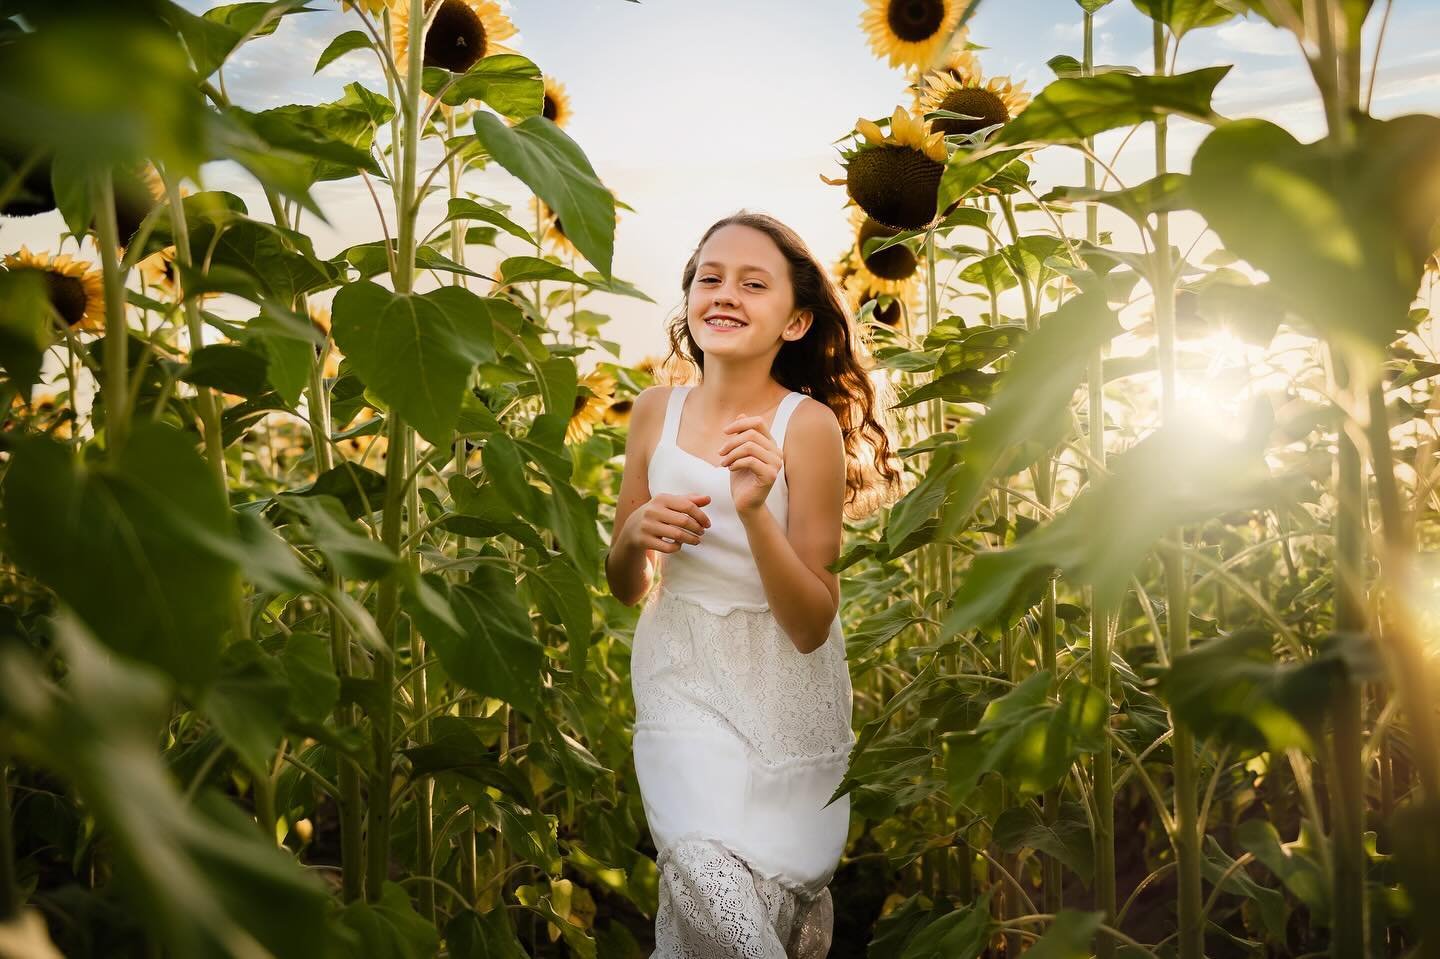 Only 𝐓𝐖𝐎 spots left for May 18th&mdash;SUNFLOWER MINIS 🌻

Info and booking link in the bio. 

𝐖𝐡𝐲 𝐜𝐡𝐨𝐨𝐬𝐞 𝐚 𝐬𝐮𝐧𝐟𝐥𝐨𝐰𝐞𝐫 𝐩𝐡𝐨𝐭𝐨𝐬𝐡𝐨𝐨𝐭?

Sunflowers make any picture appear like it&rsquo;s straight out of a fantasy, making th